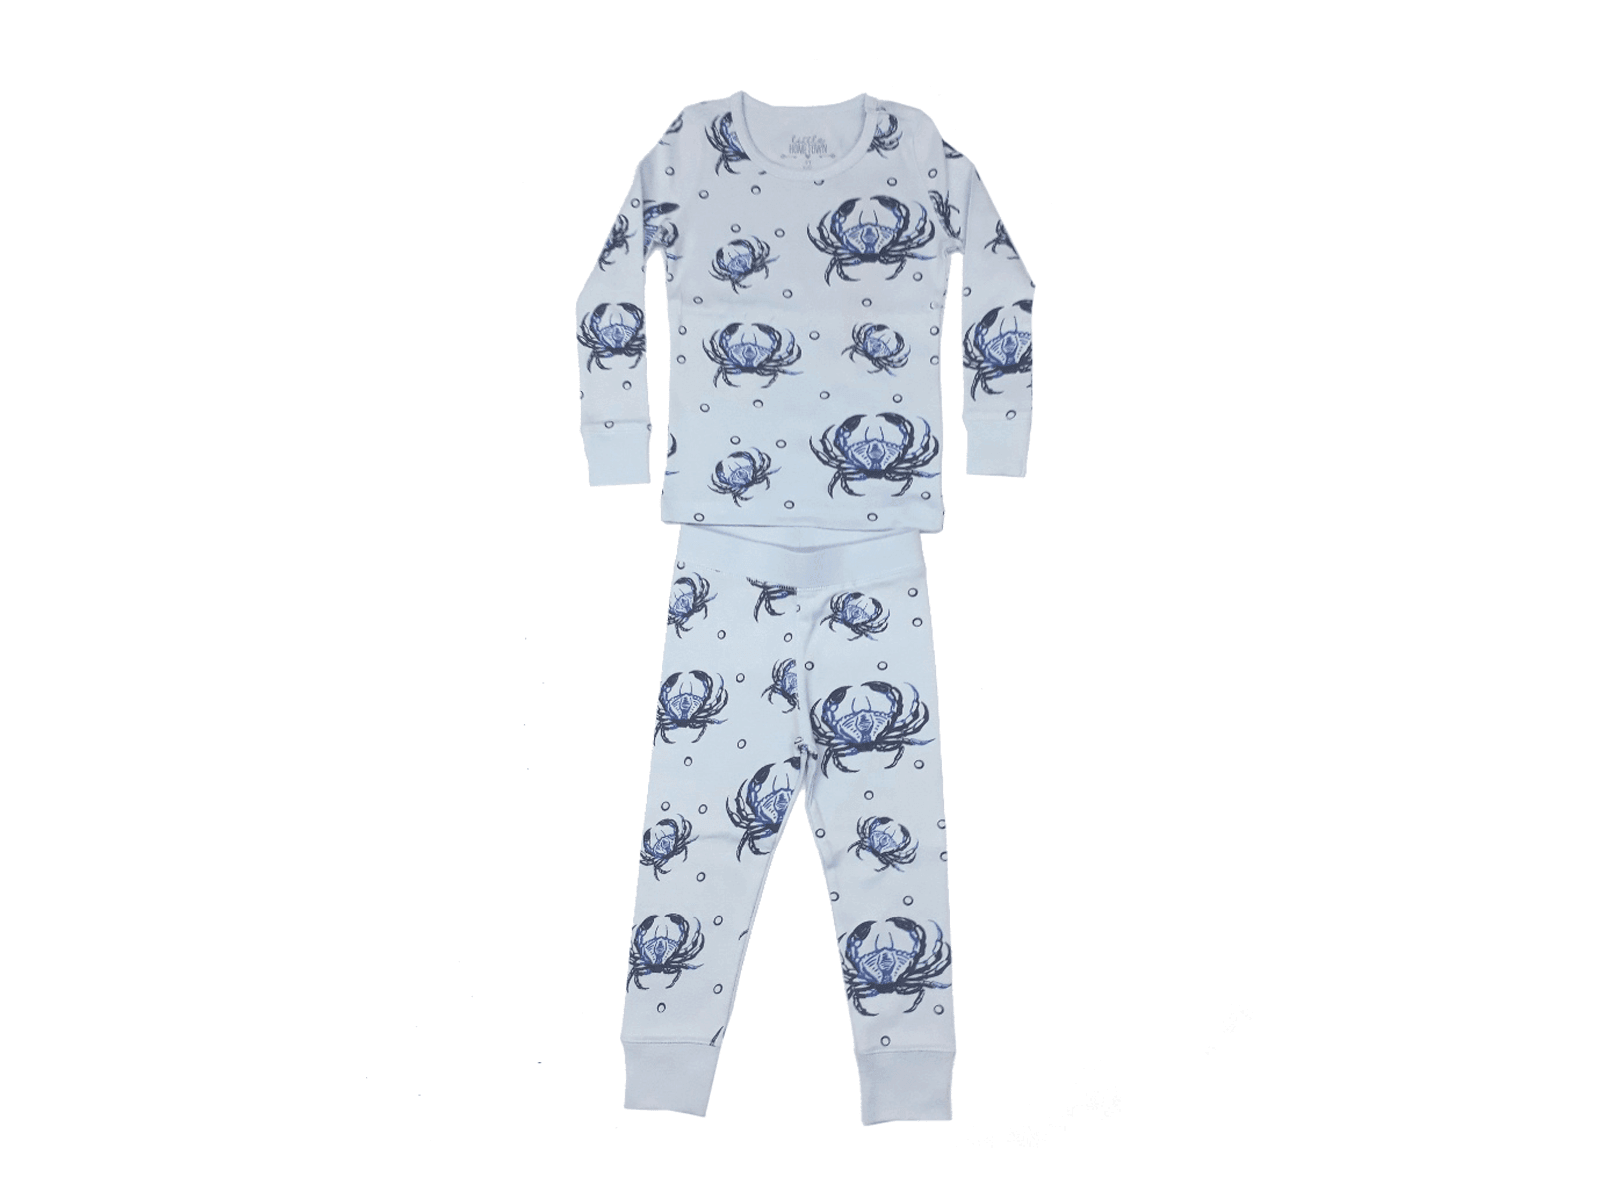 Toddler pajamas with playful blue crab pattern on a white background, featuring a cozy and soft fabric.